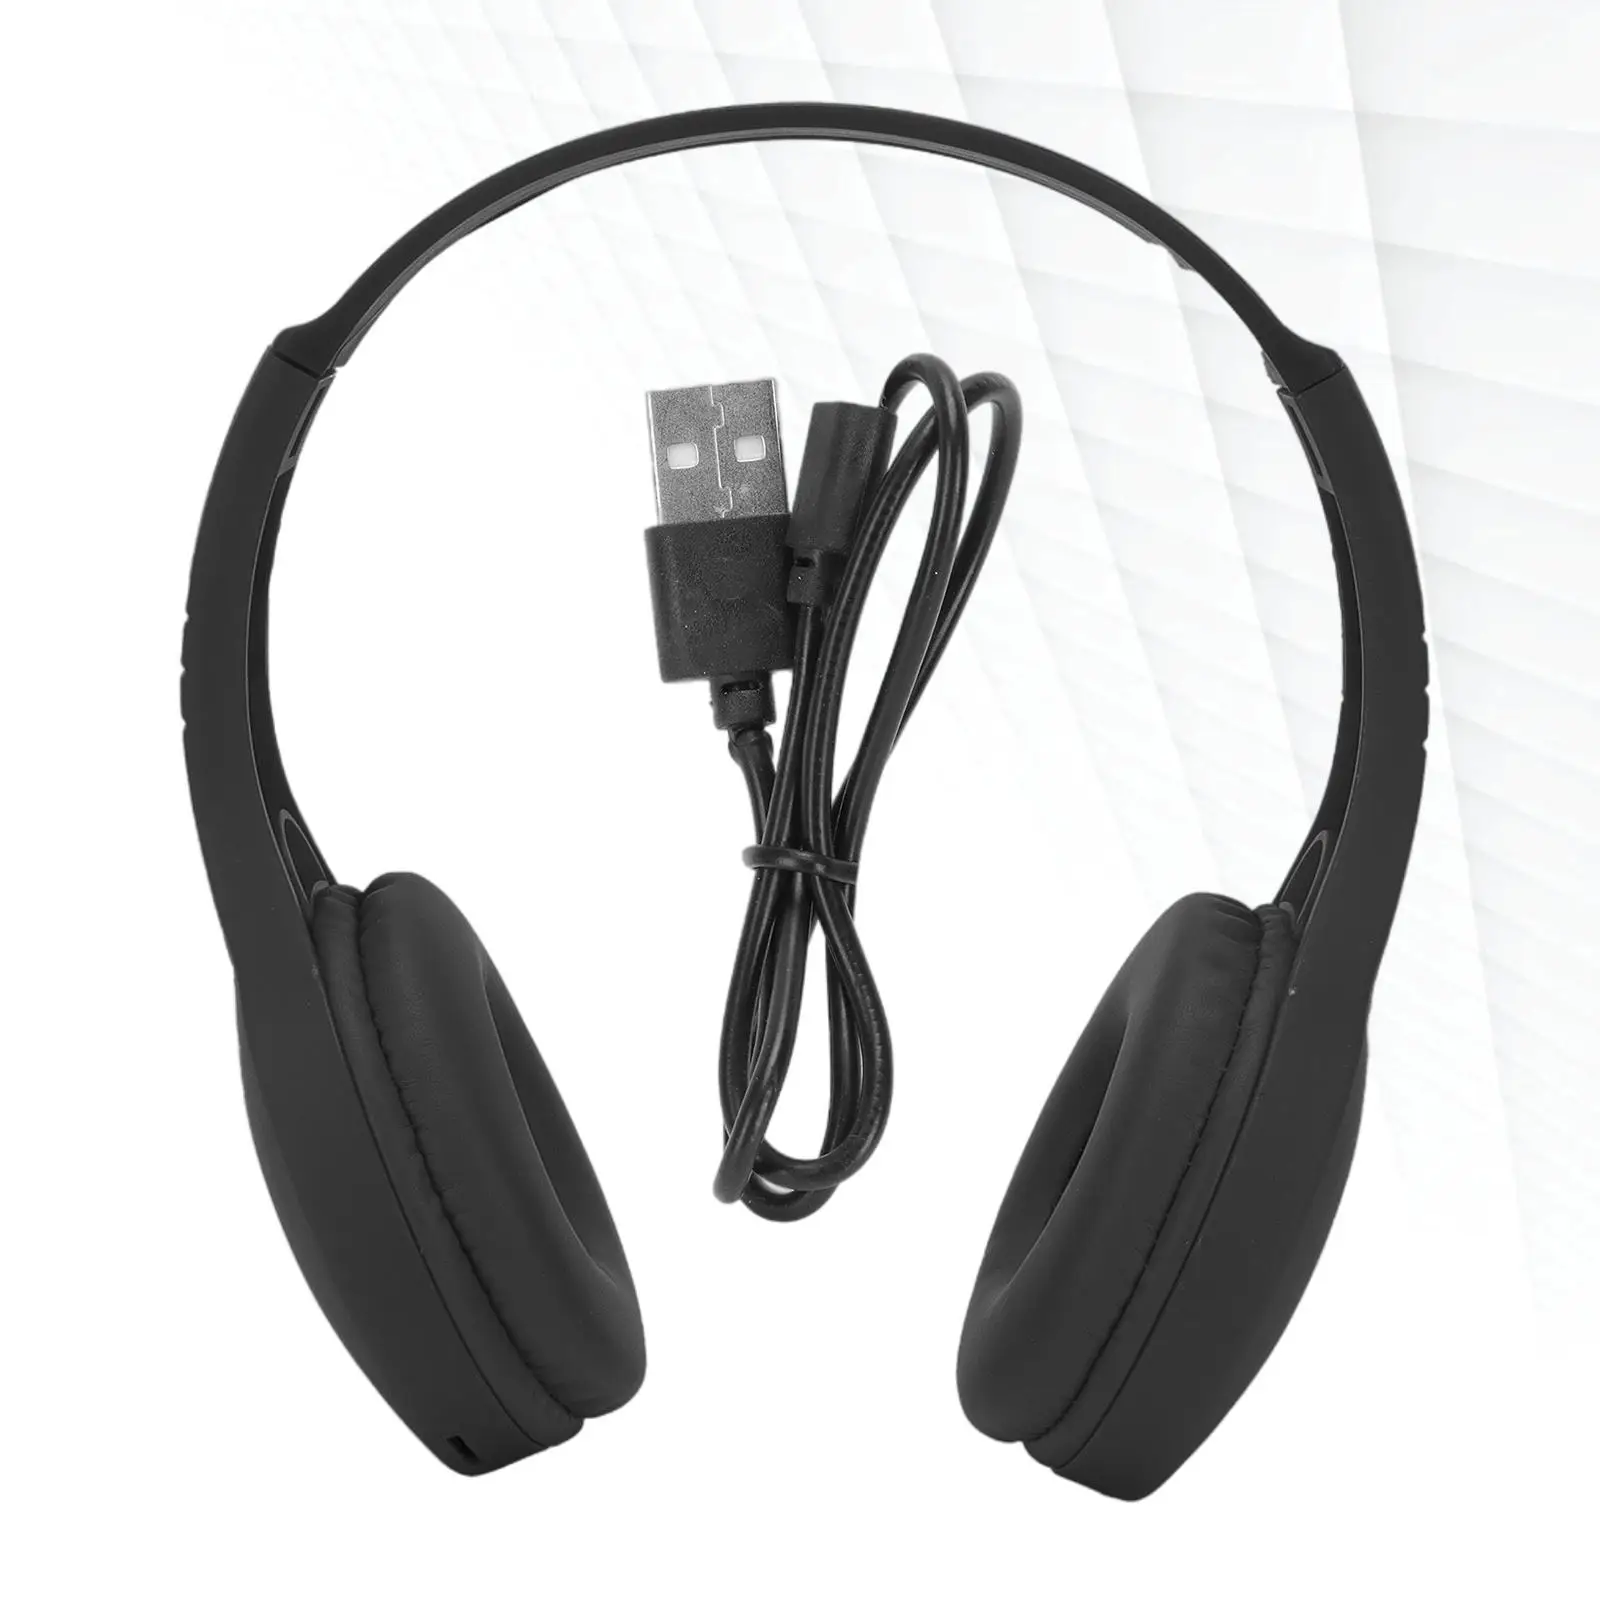 Over-Ear Wireless Headphones Active Noise Canceling Bluetooth Headset for Travel Office Computer Games Laptop TV Smartphones